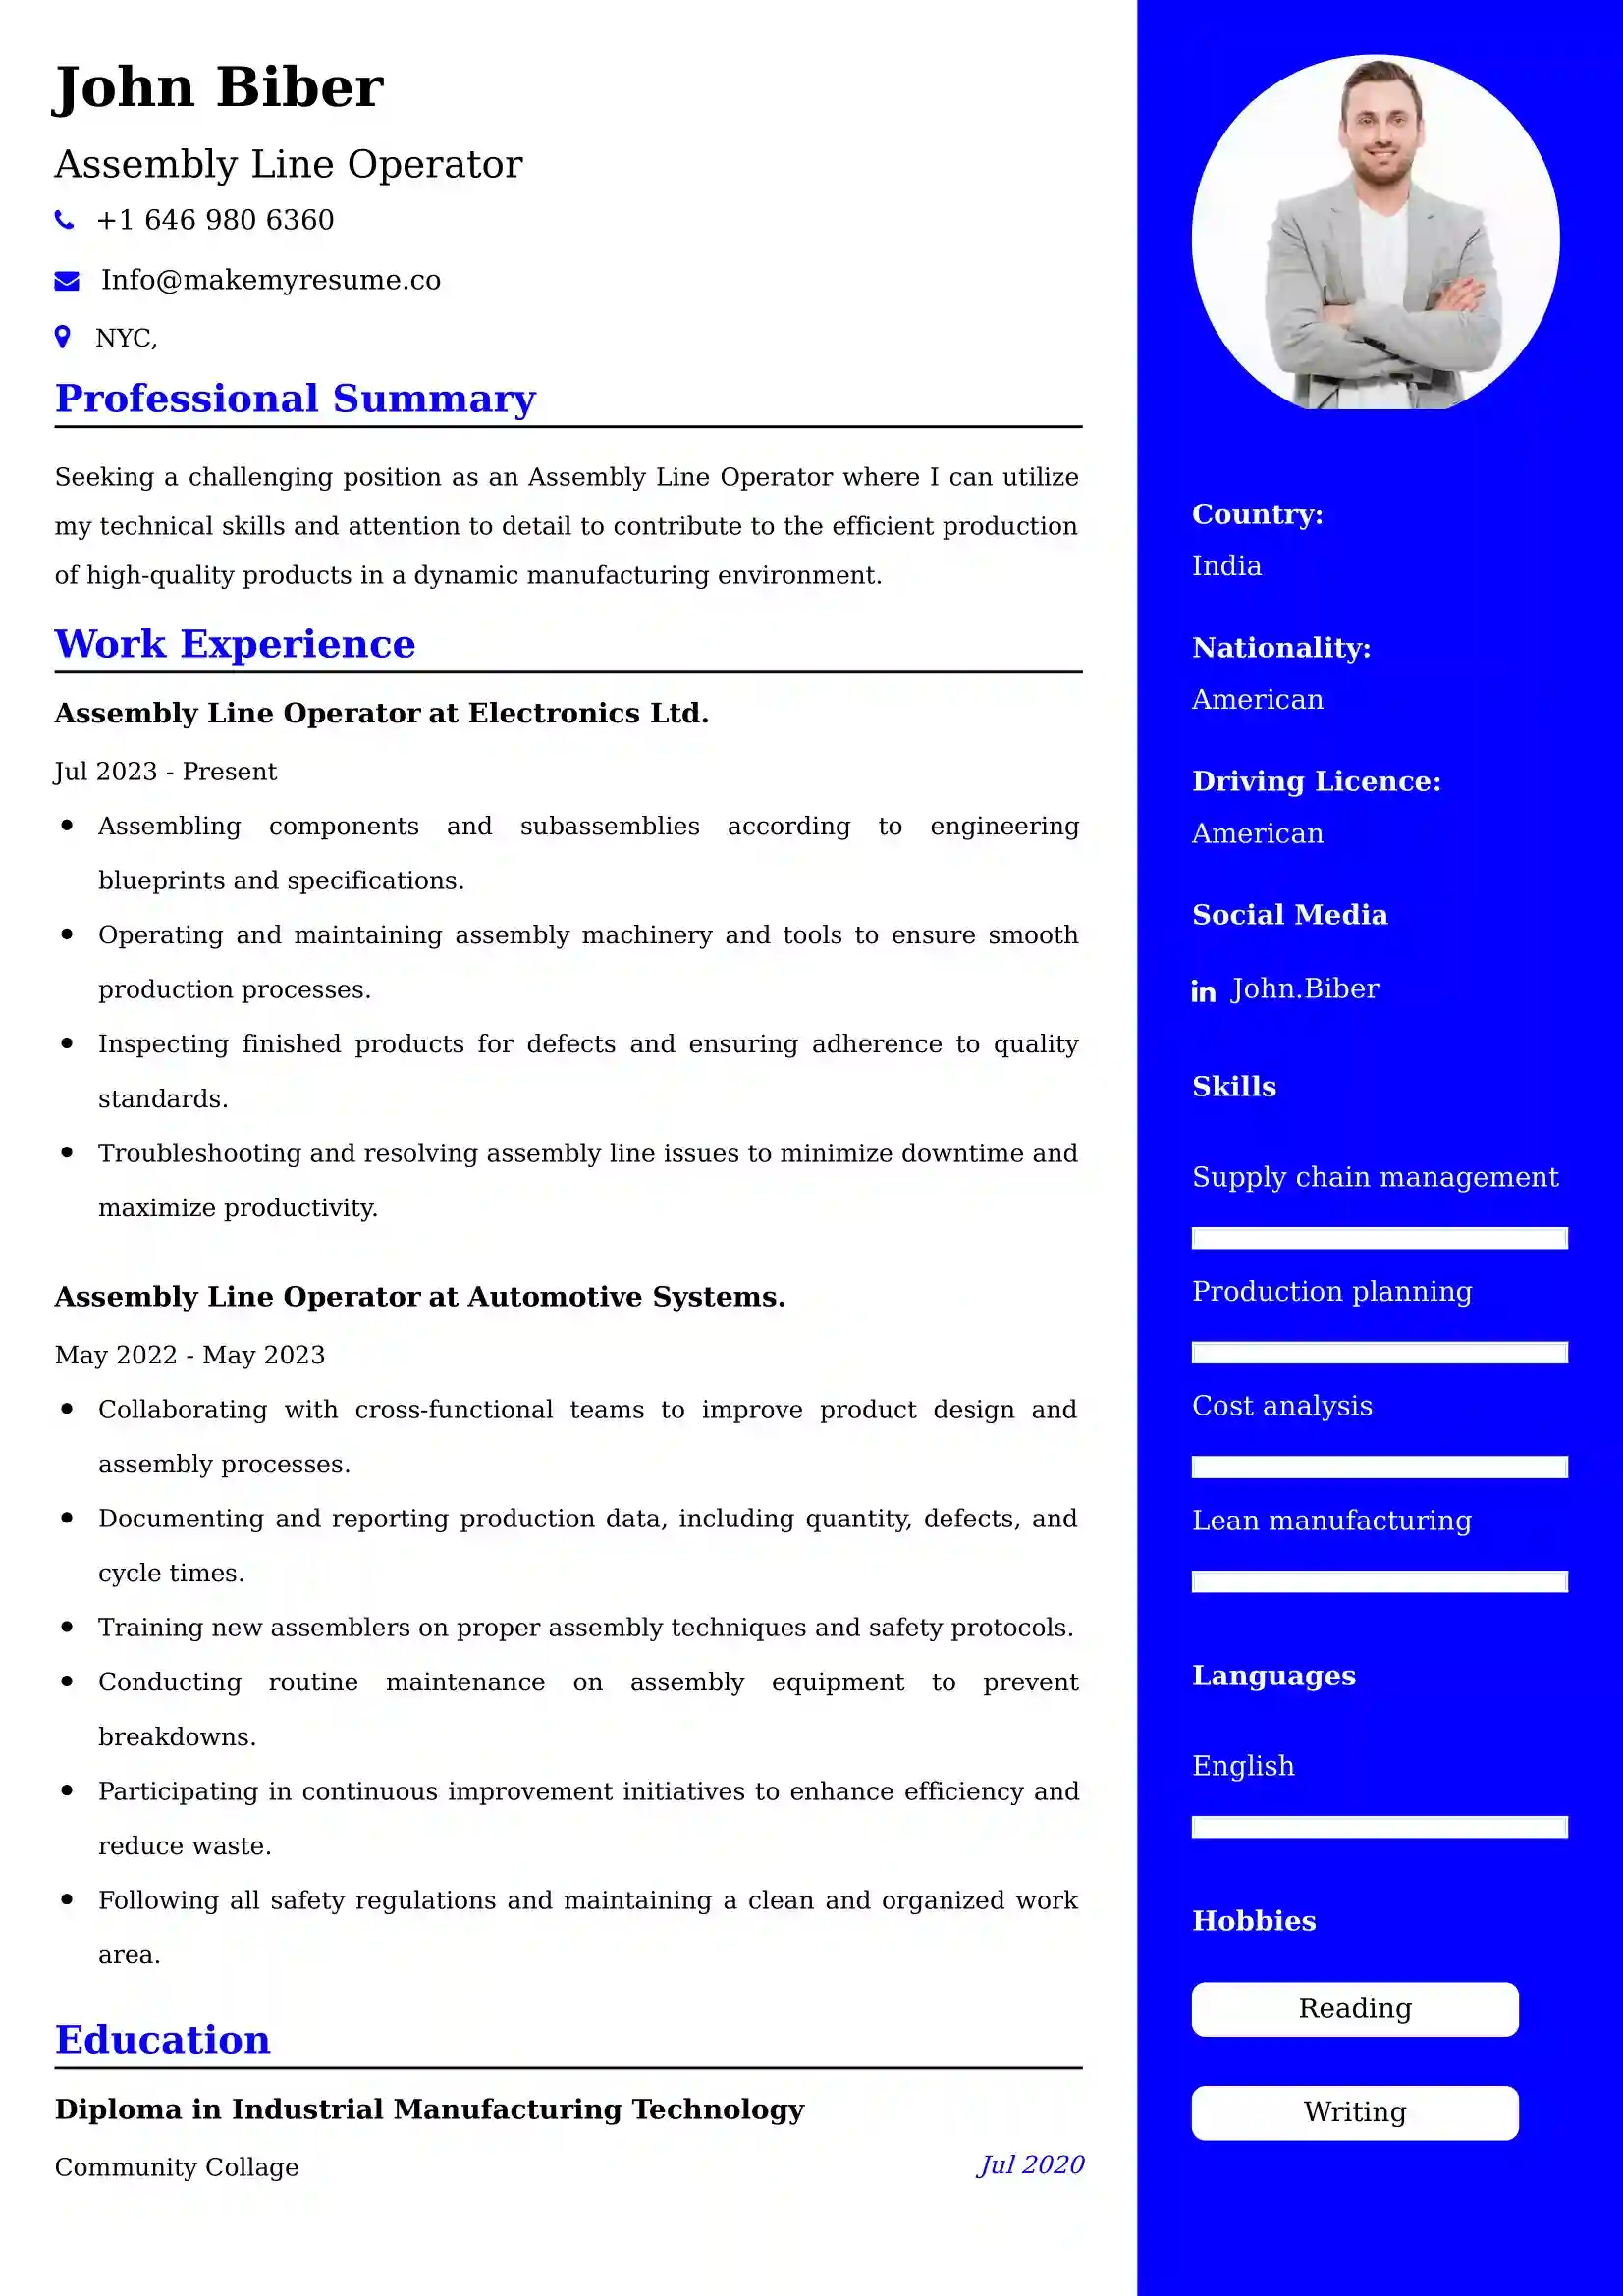 Assembly Line Operator Resume Examples for UK Jobs - Tips and Guide